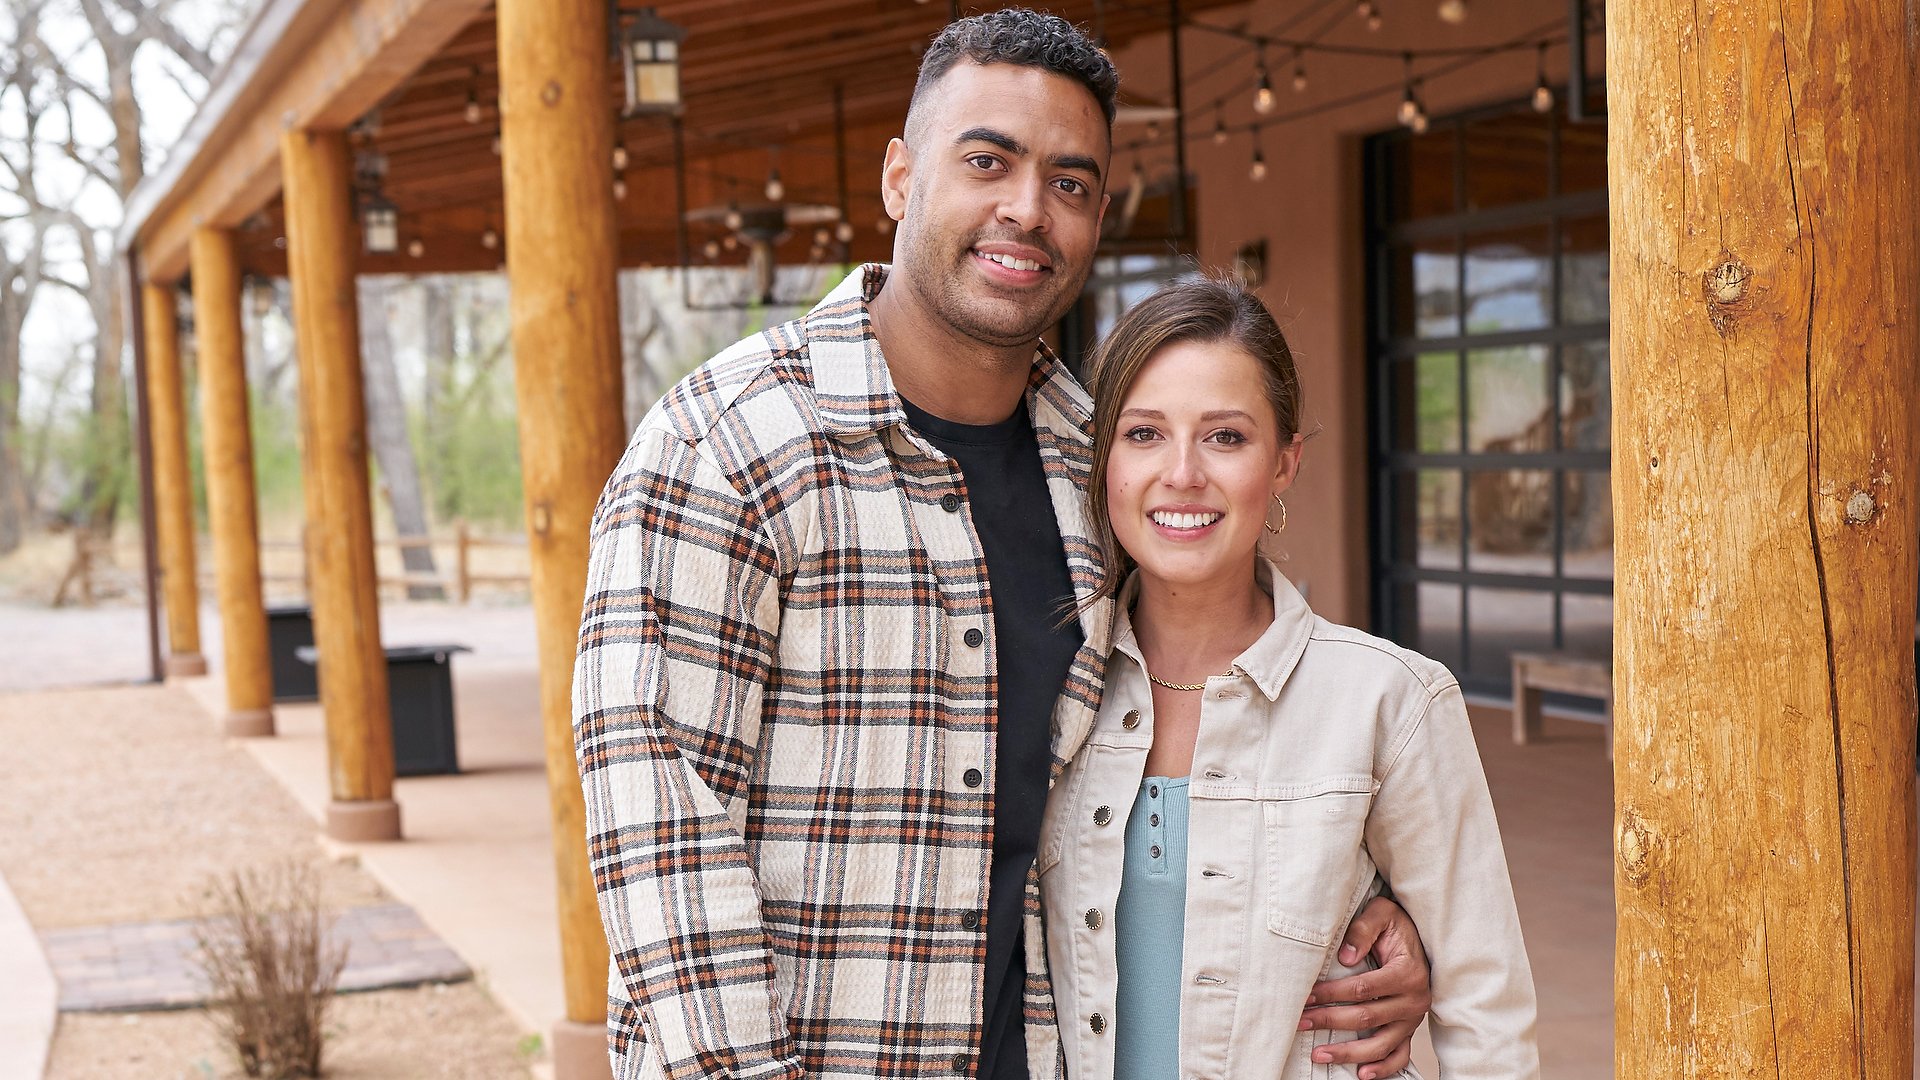 Justin Glaze and Katie Thurston pose during their Hometown Date in ‘The Bachelorette’ Season 17 Episode 9